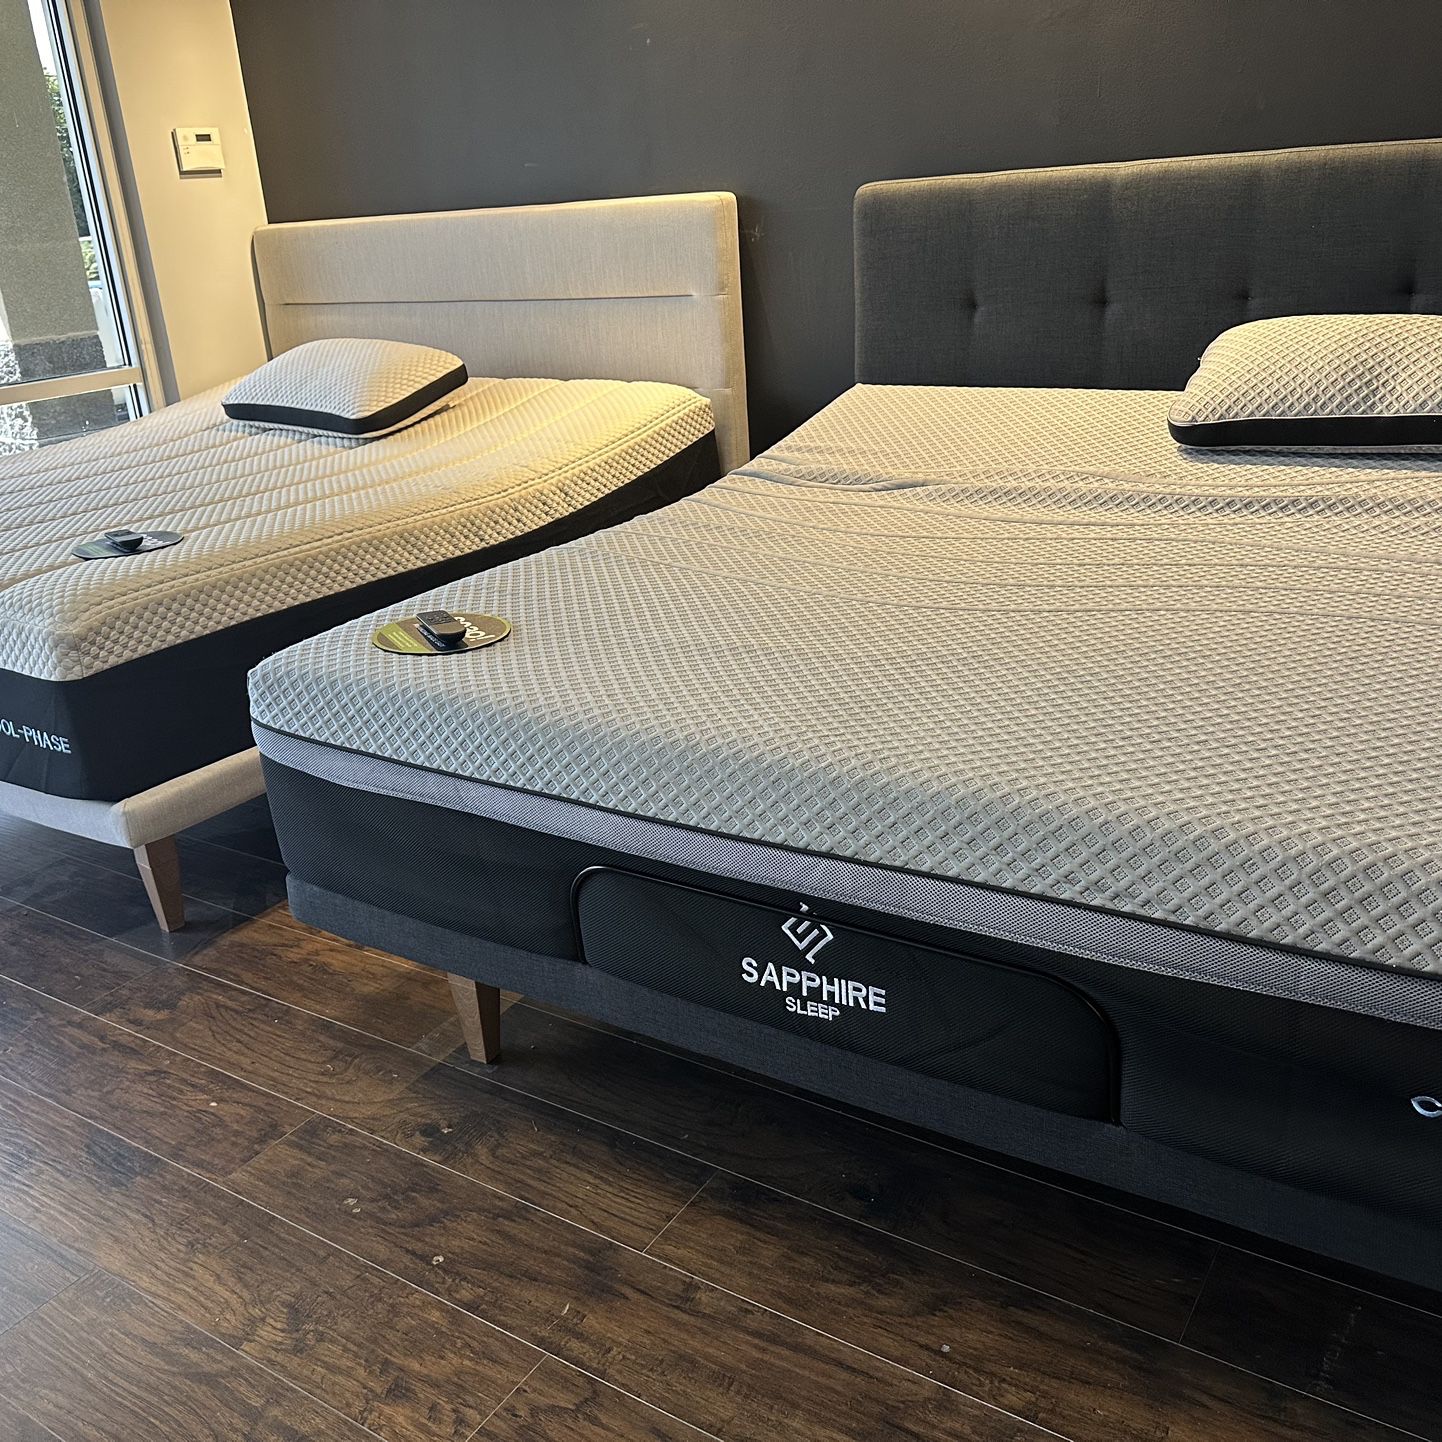 Mattresses 30-80% Off Today!